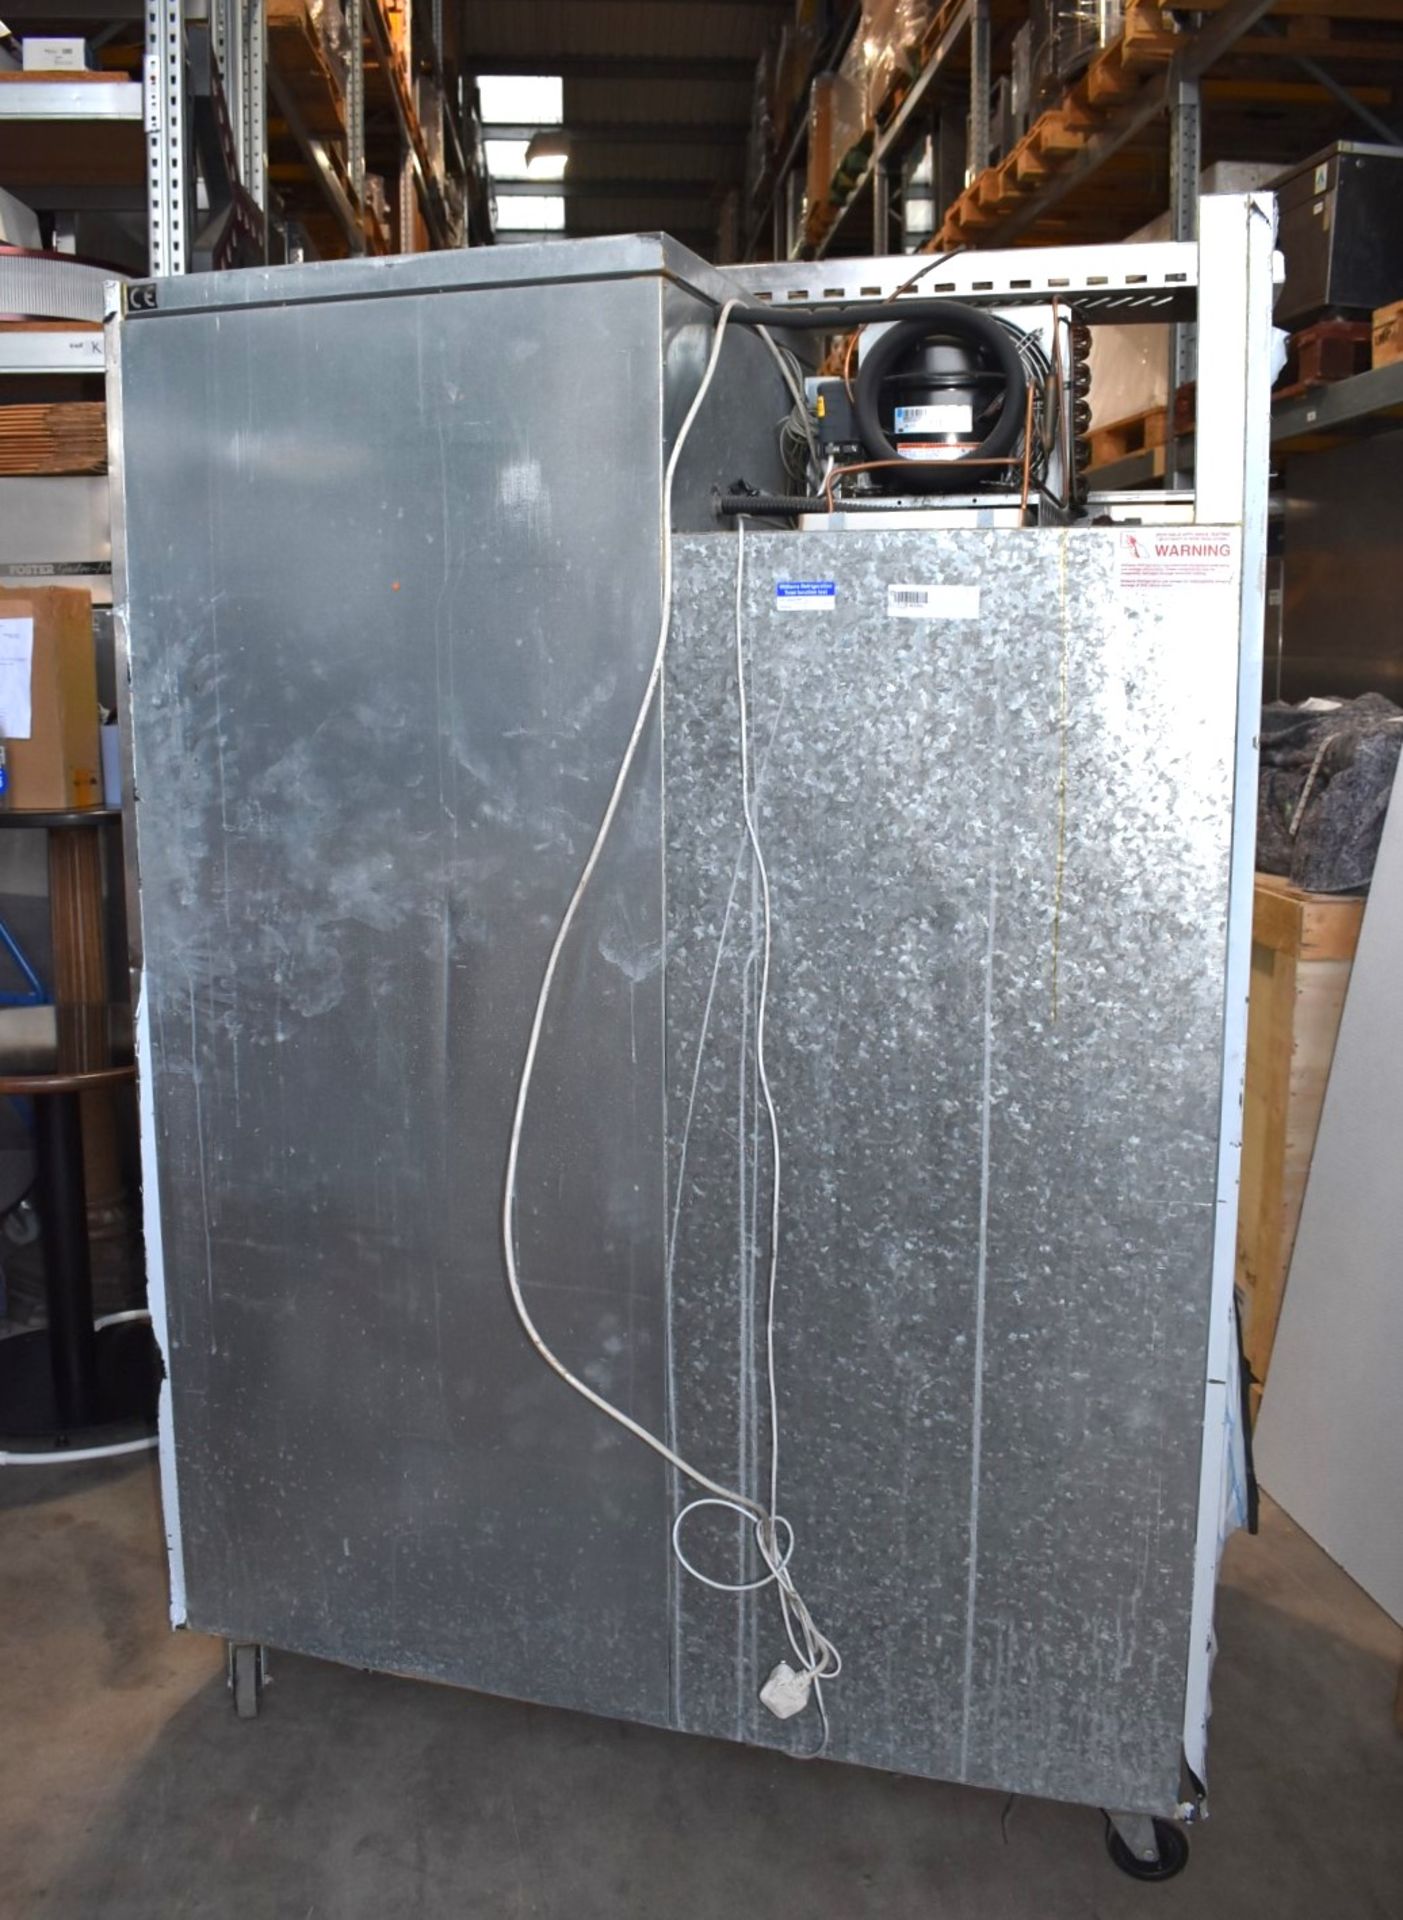 1 x Williams MJ2SA Jade Upright Double Door Refrigerator - Recently Removed From a Working - Image 7 of 9